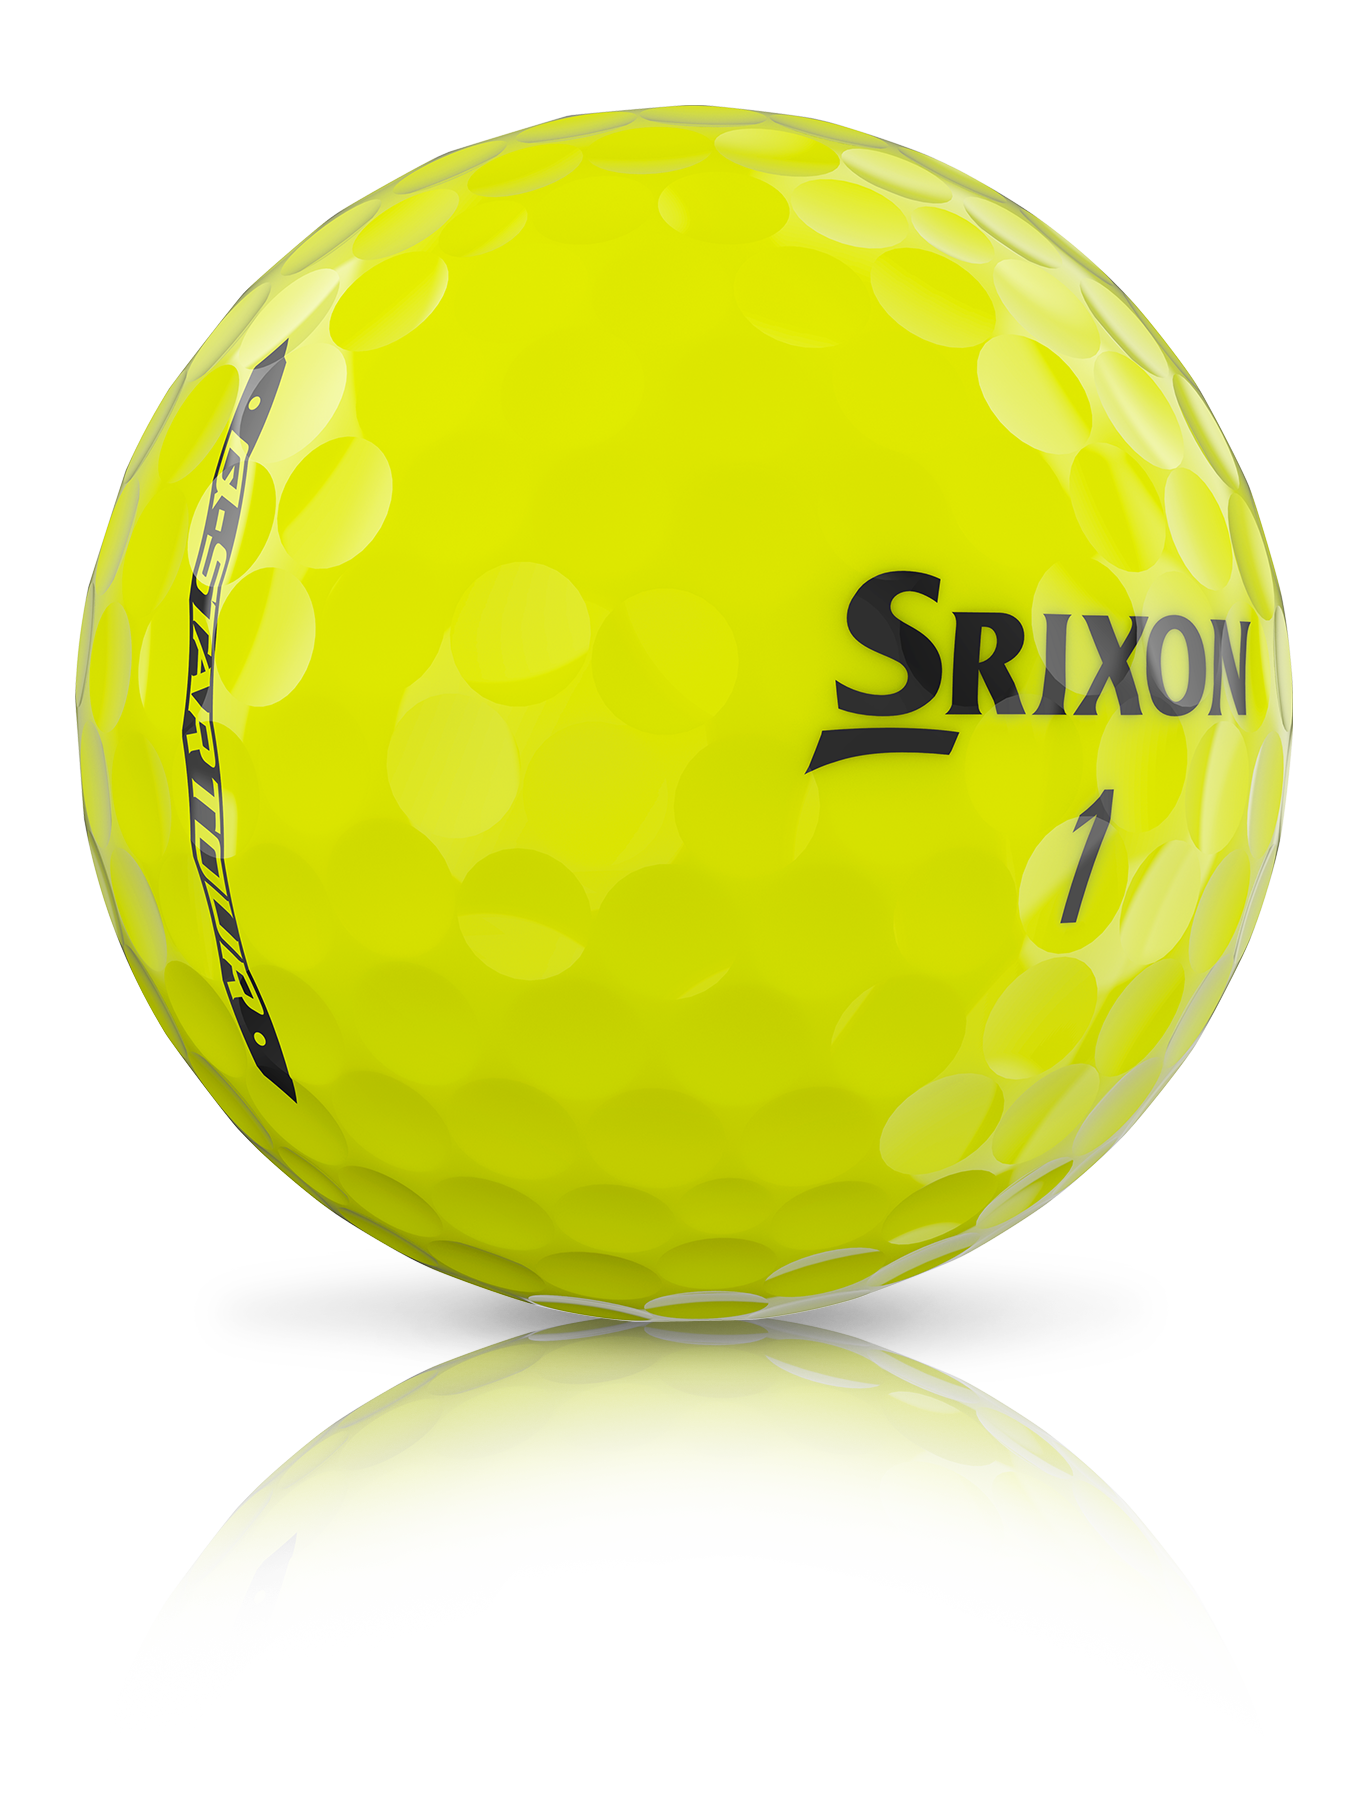 Are Value Golf Balls Holding You Back Gear Questions